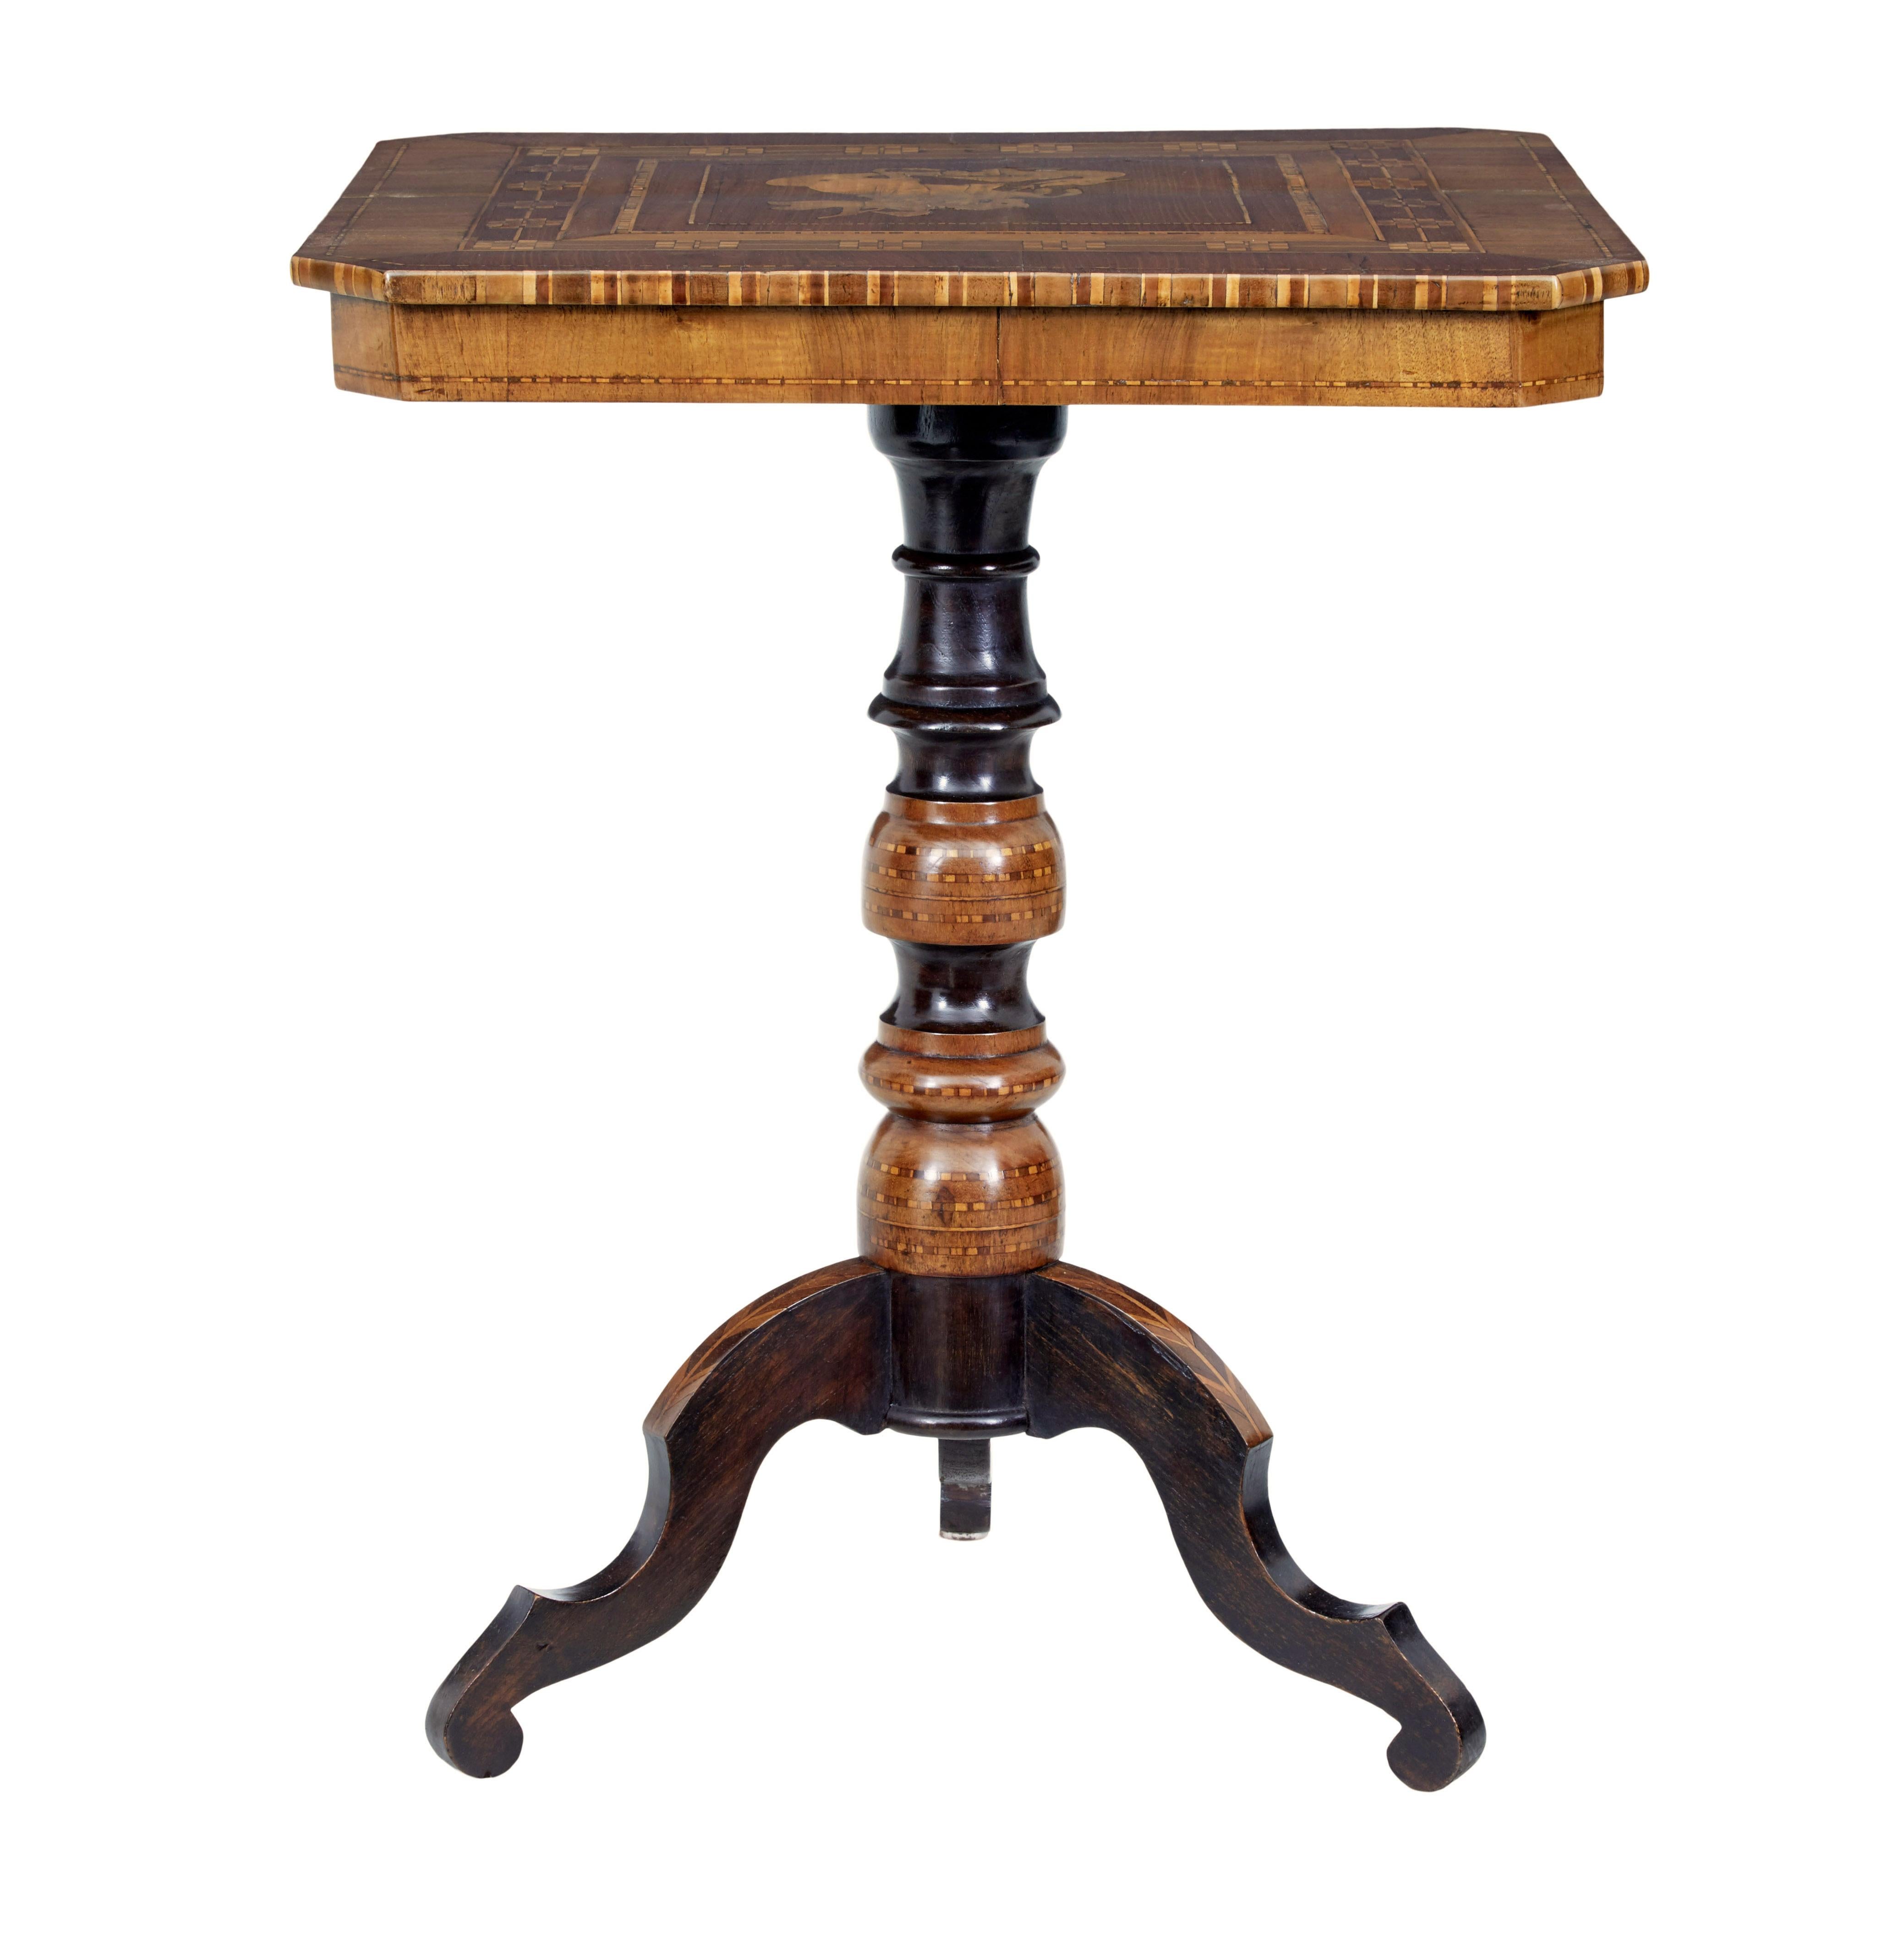 Late 19th century italian walnut sorrento occasional table, circa 1890.

Profusely inlaid italian sorrento table in walnut and olive wood. Square top with canted corners, the top flows with a geometric pattern and depicts george and the dragon in